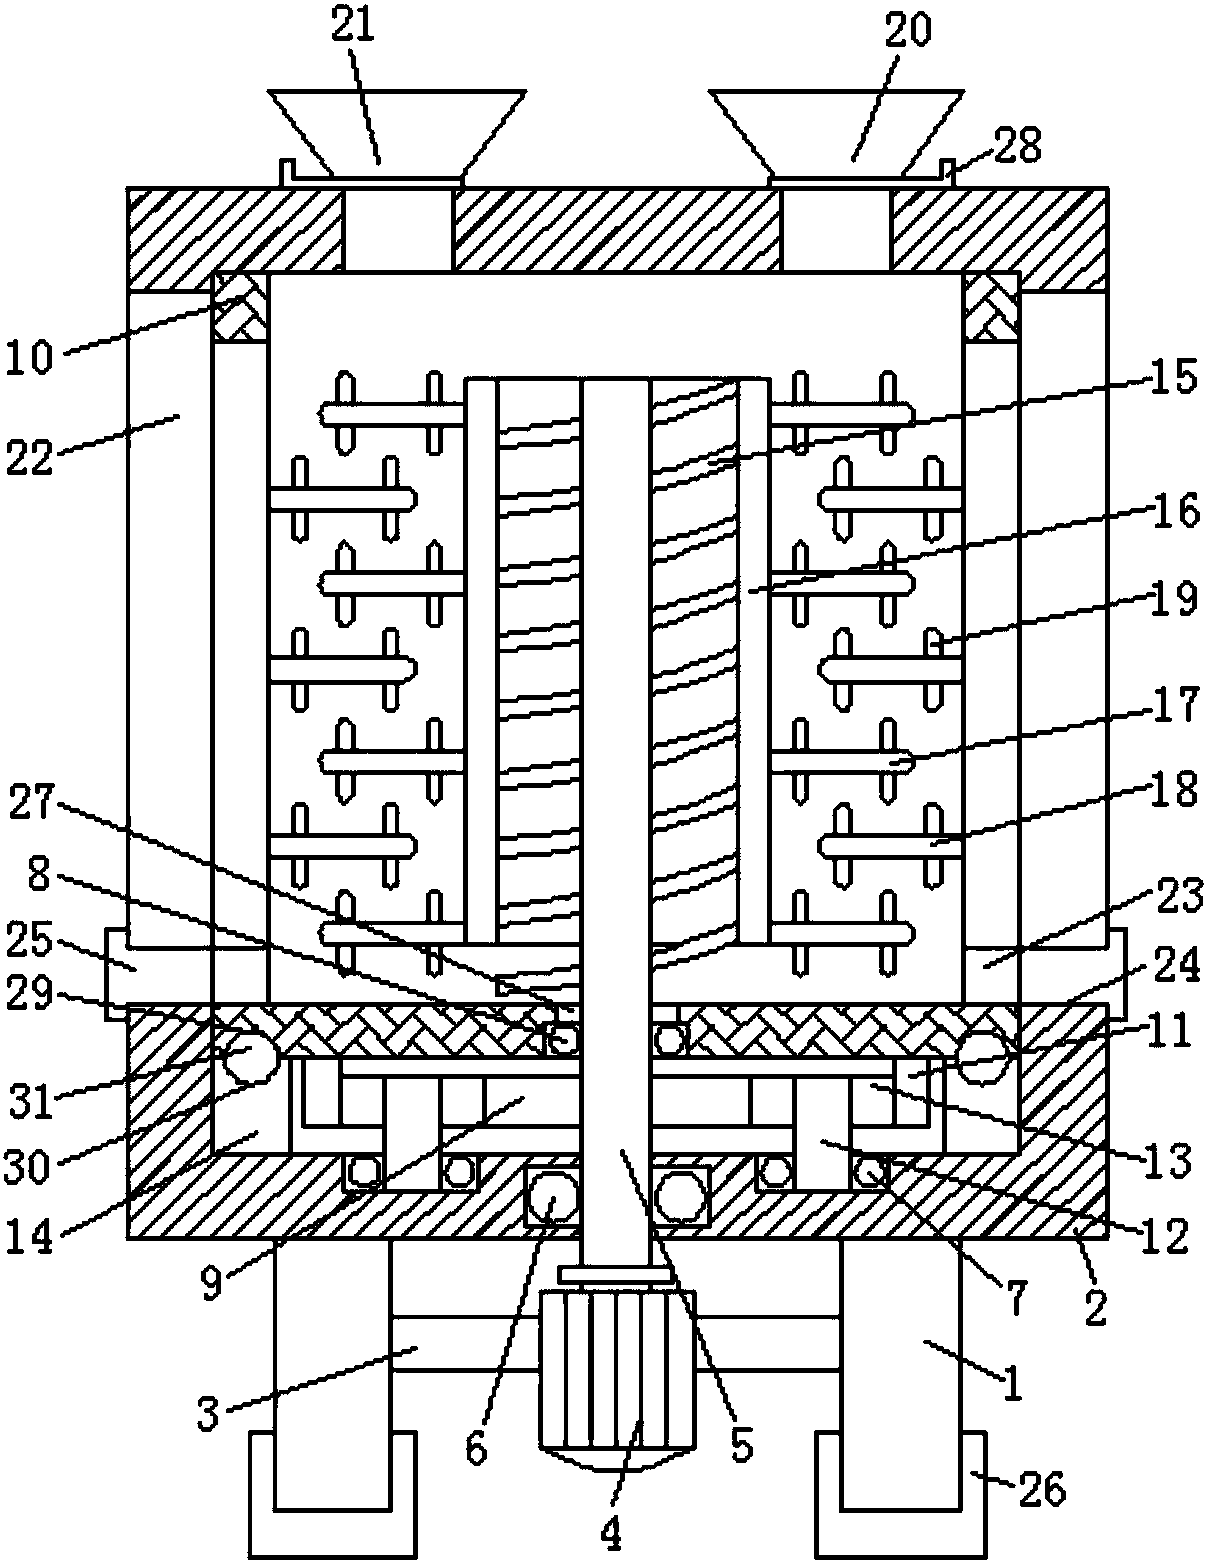 Medical mixing device capable of uniformly mixing and stirring